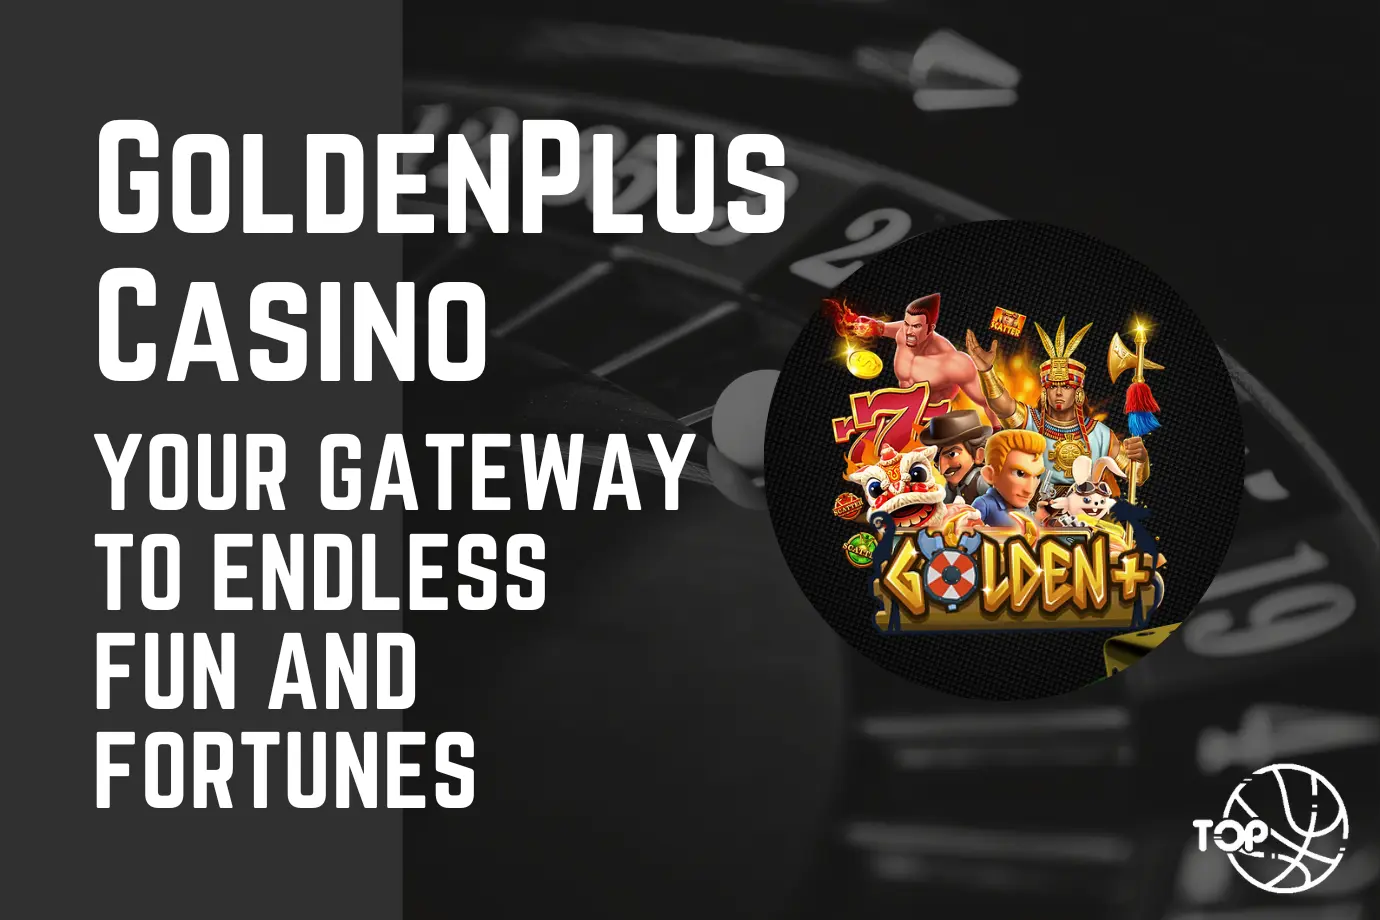 GoldenPlus Casino: Your Gateway to Endless Fun and Fortunes